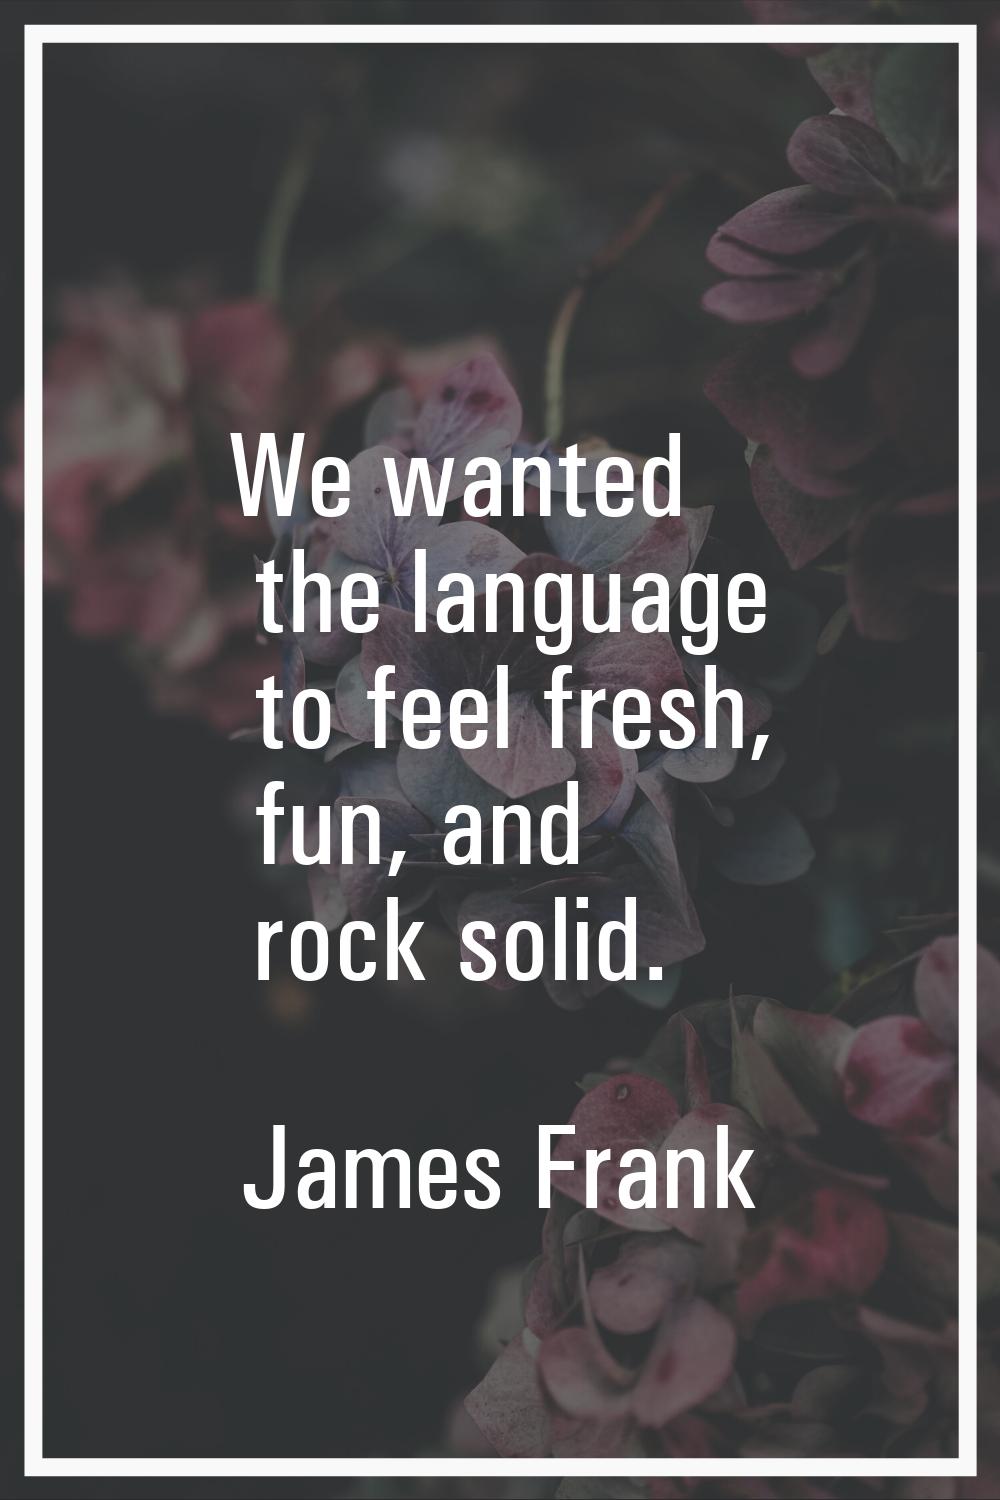 We wanted the language to feel fresh, fun, and rock solid.